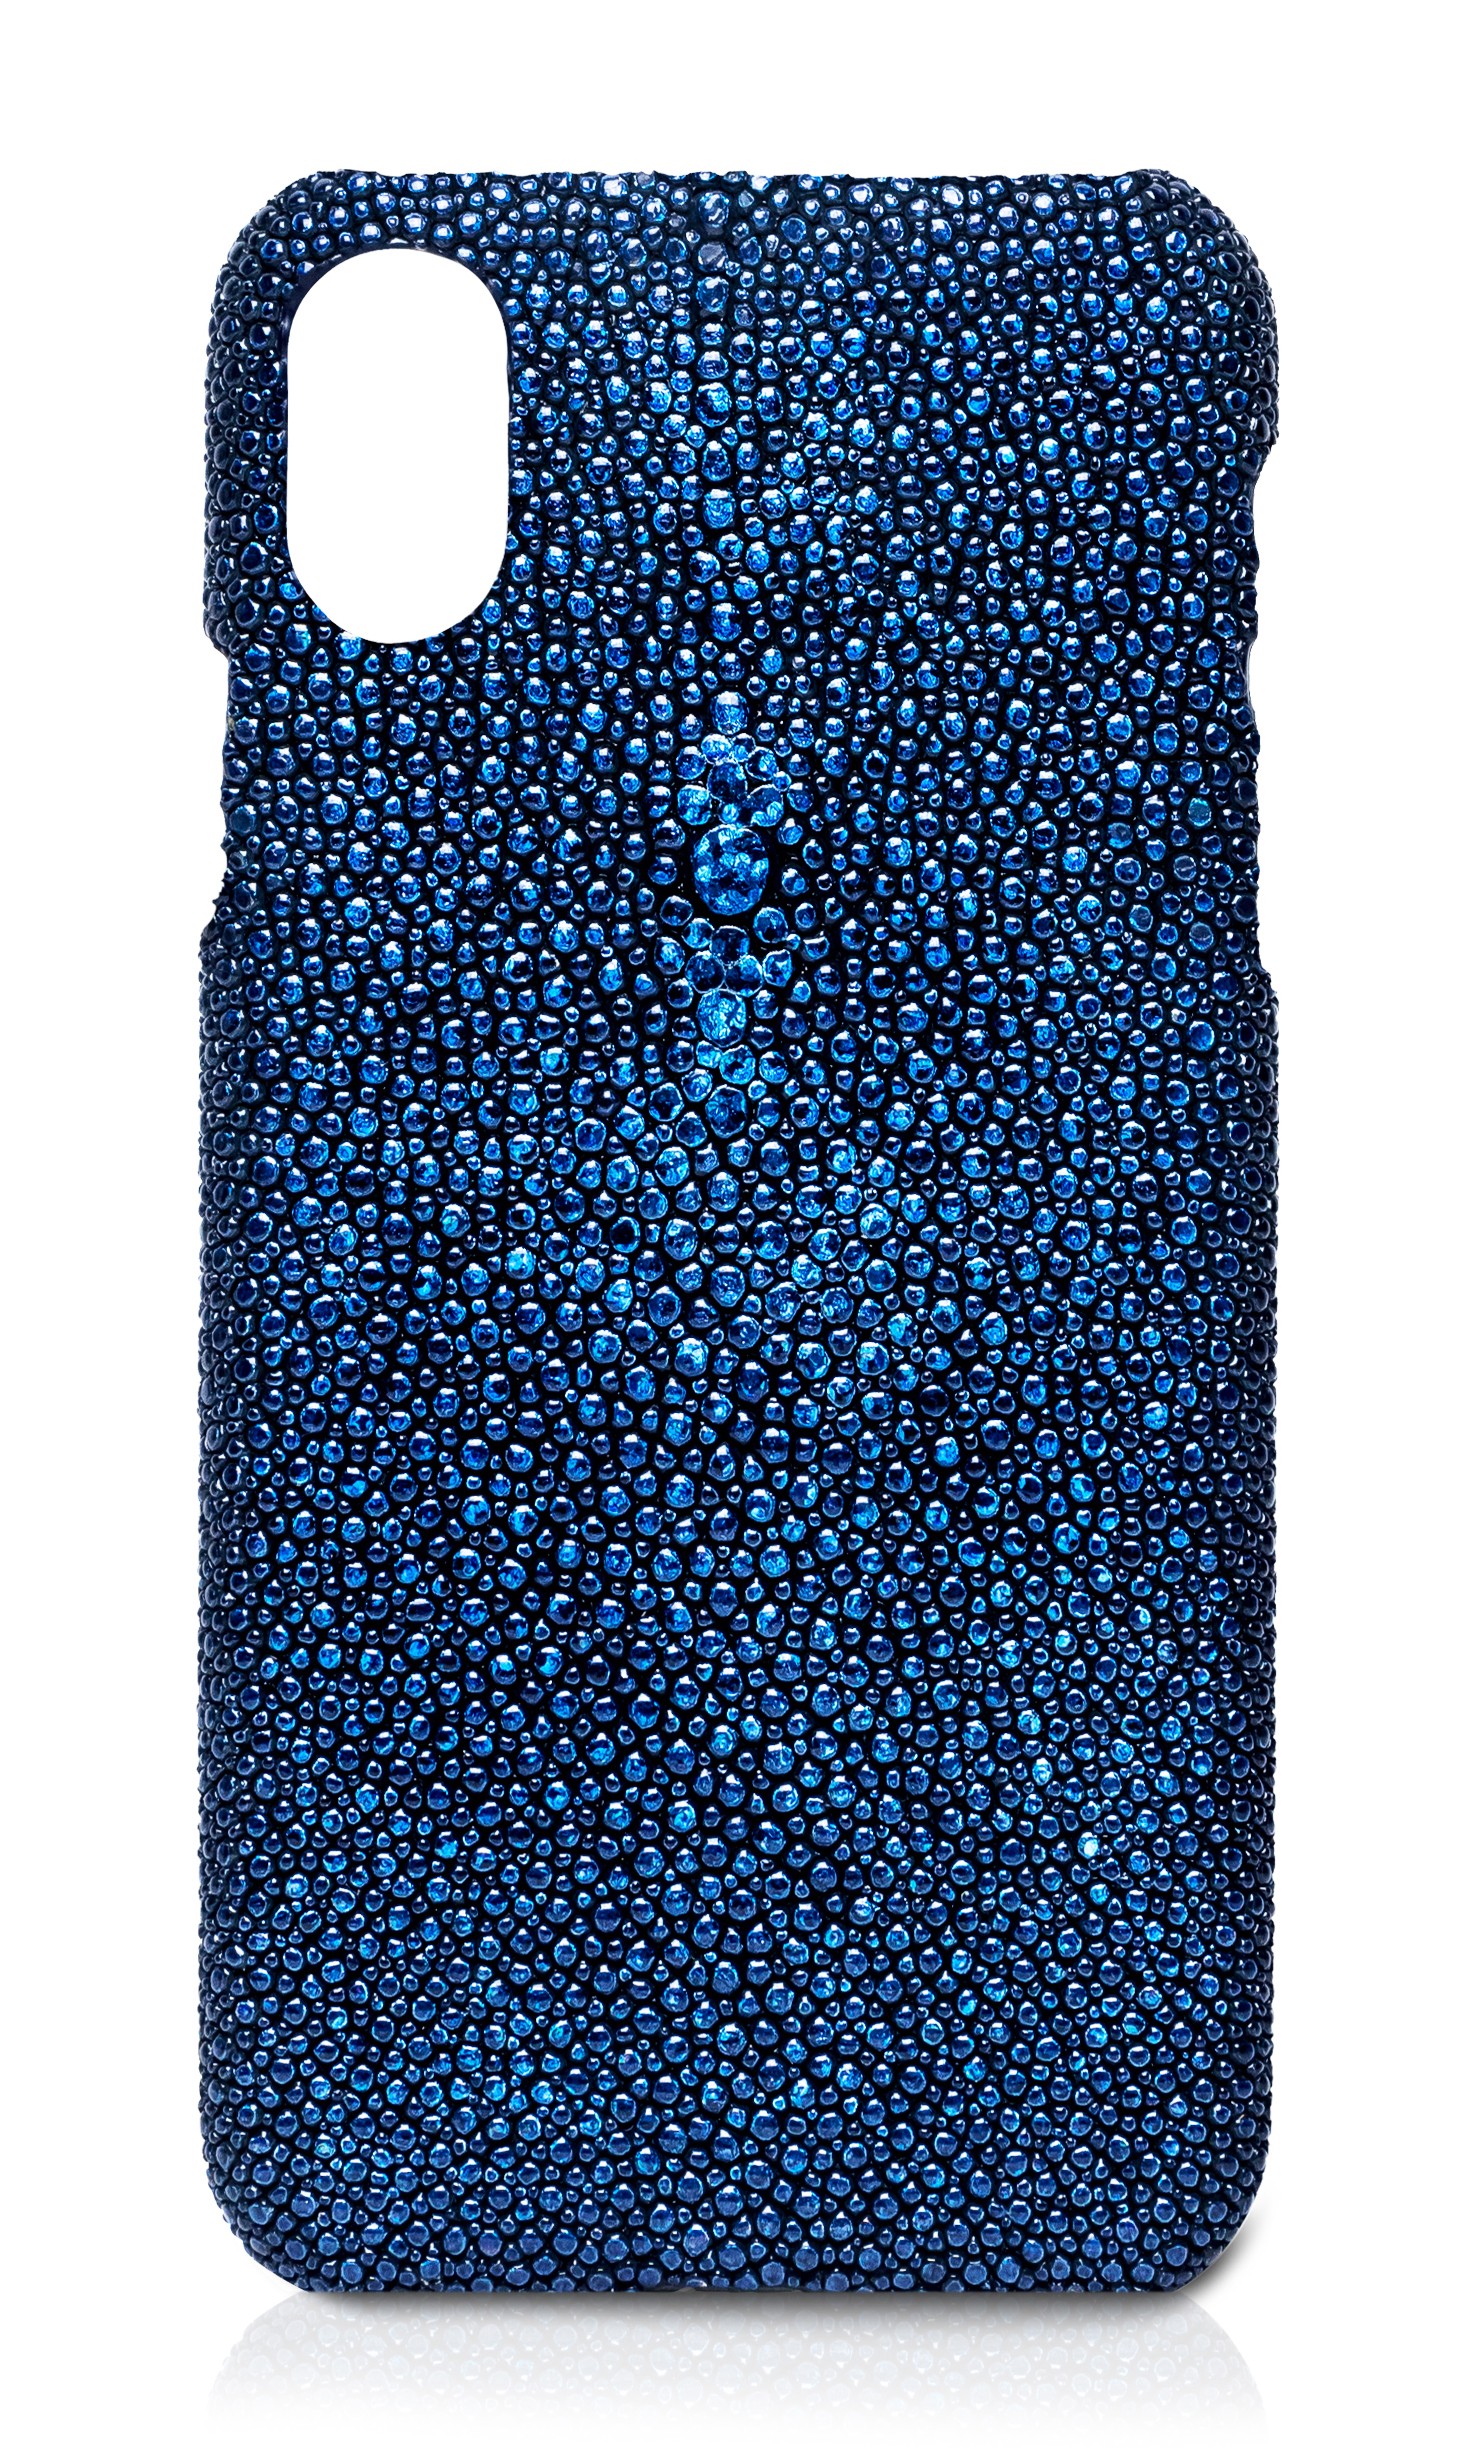 Ammoment - Stingray in Glitter Metallic Blue - Leather Cover - iPhone X